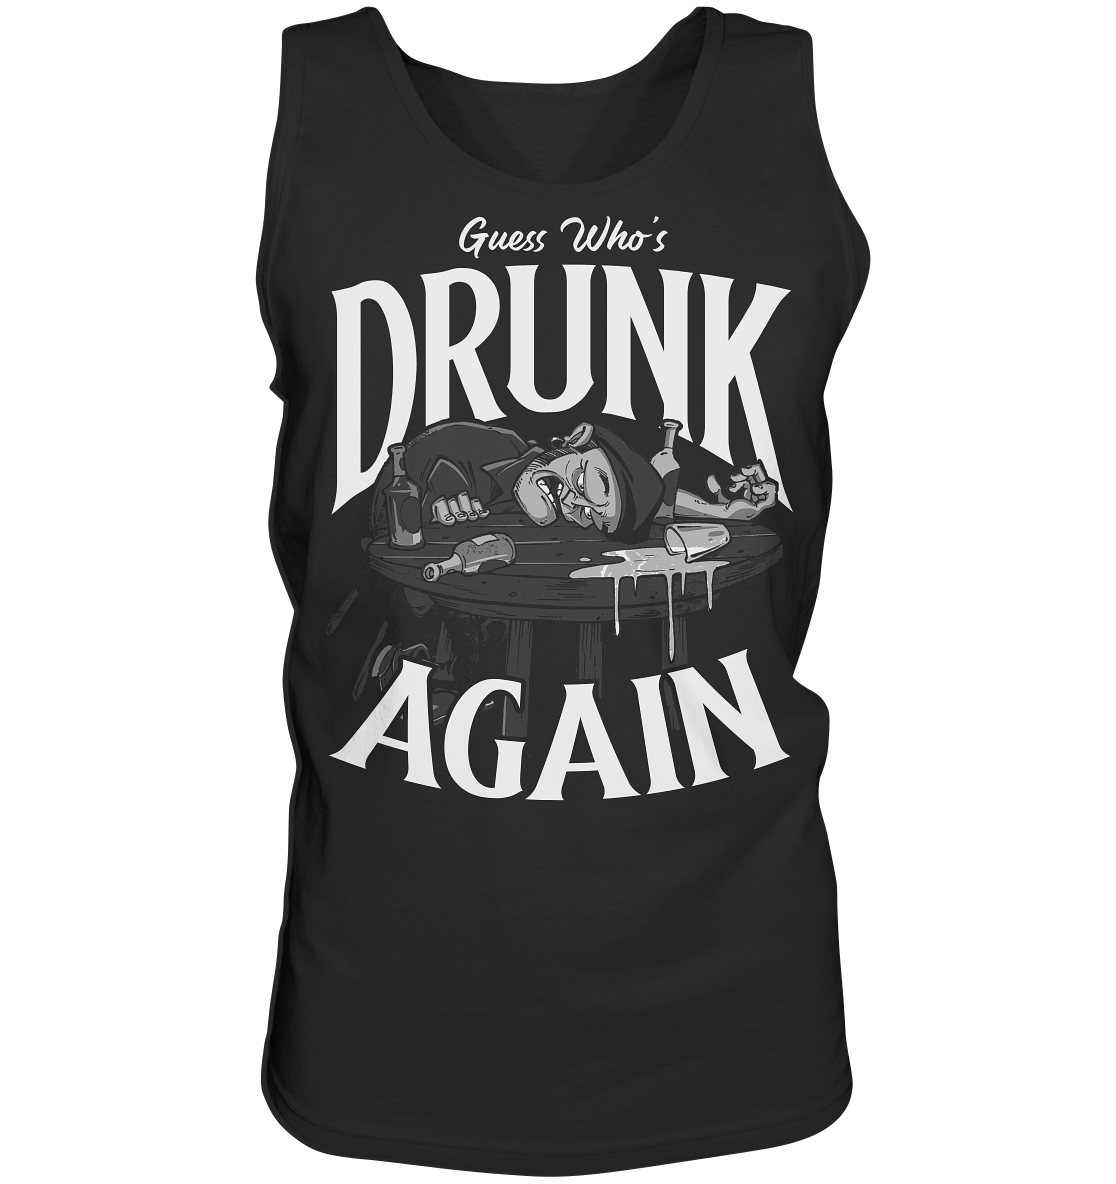 Guess Who's Drunk Again - Tank-Top